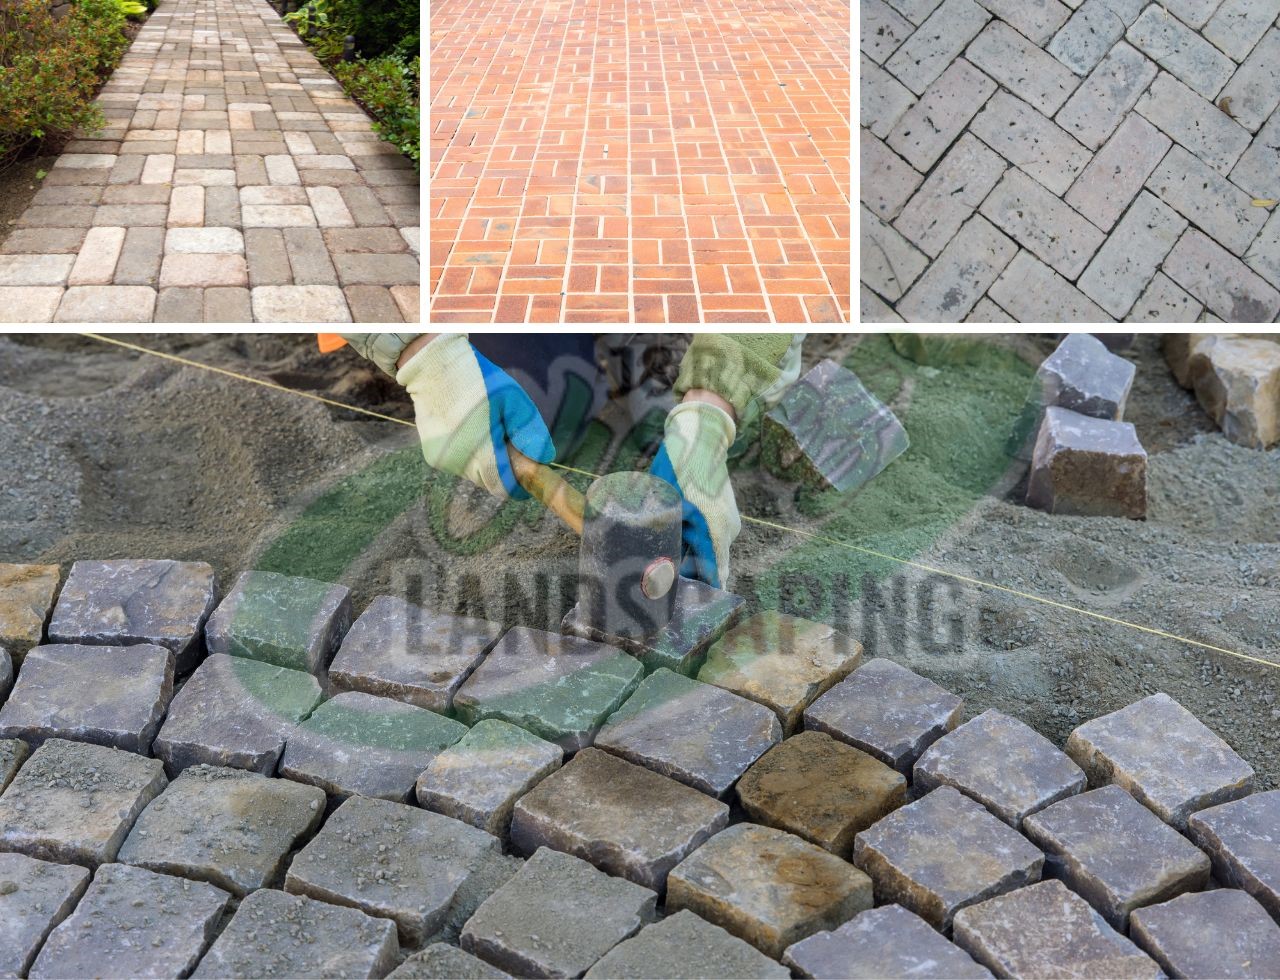 Transform Your Garden with These Amazing Paver Walkway Designs